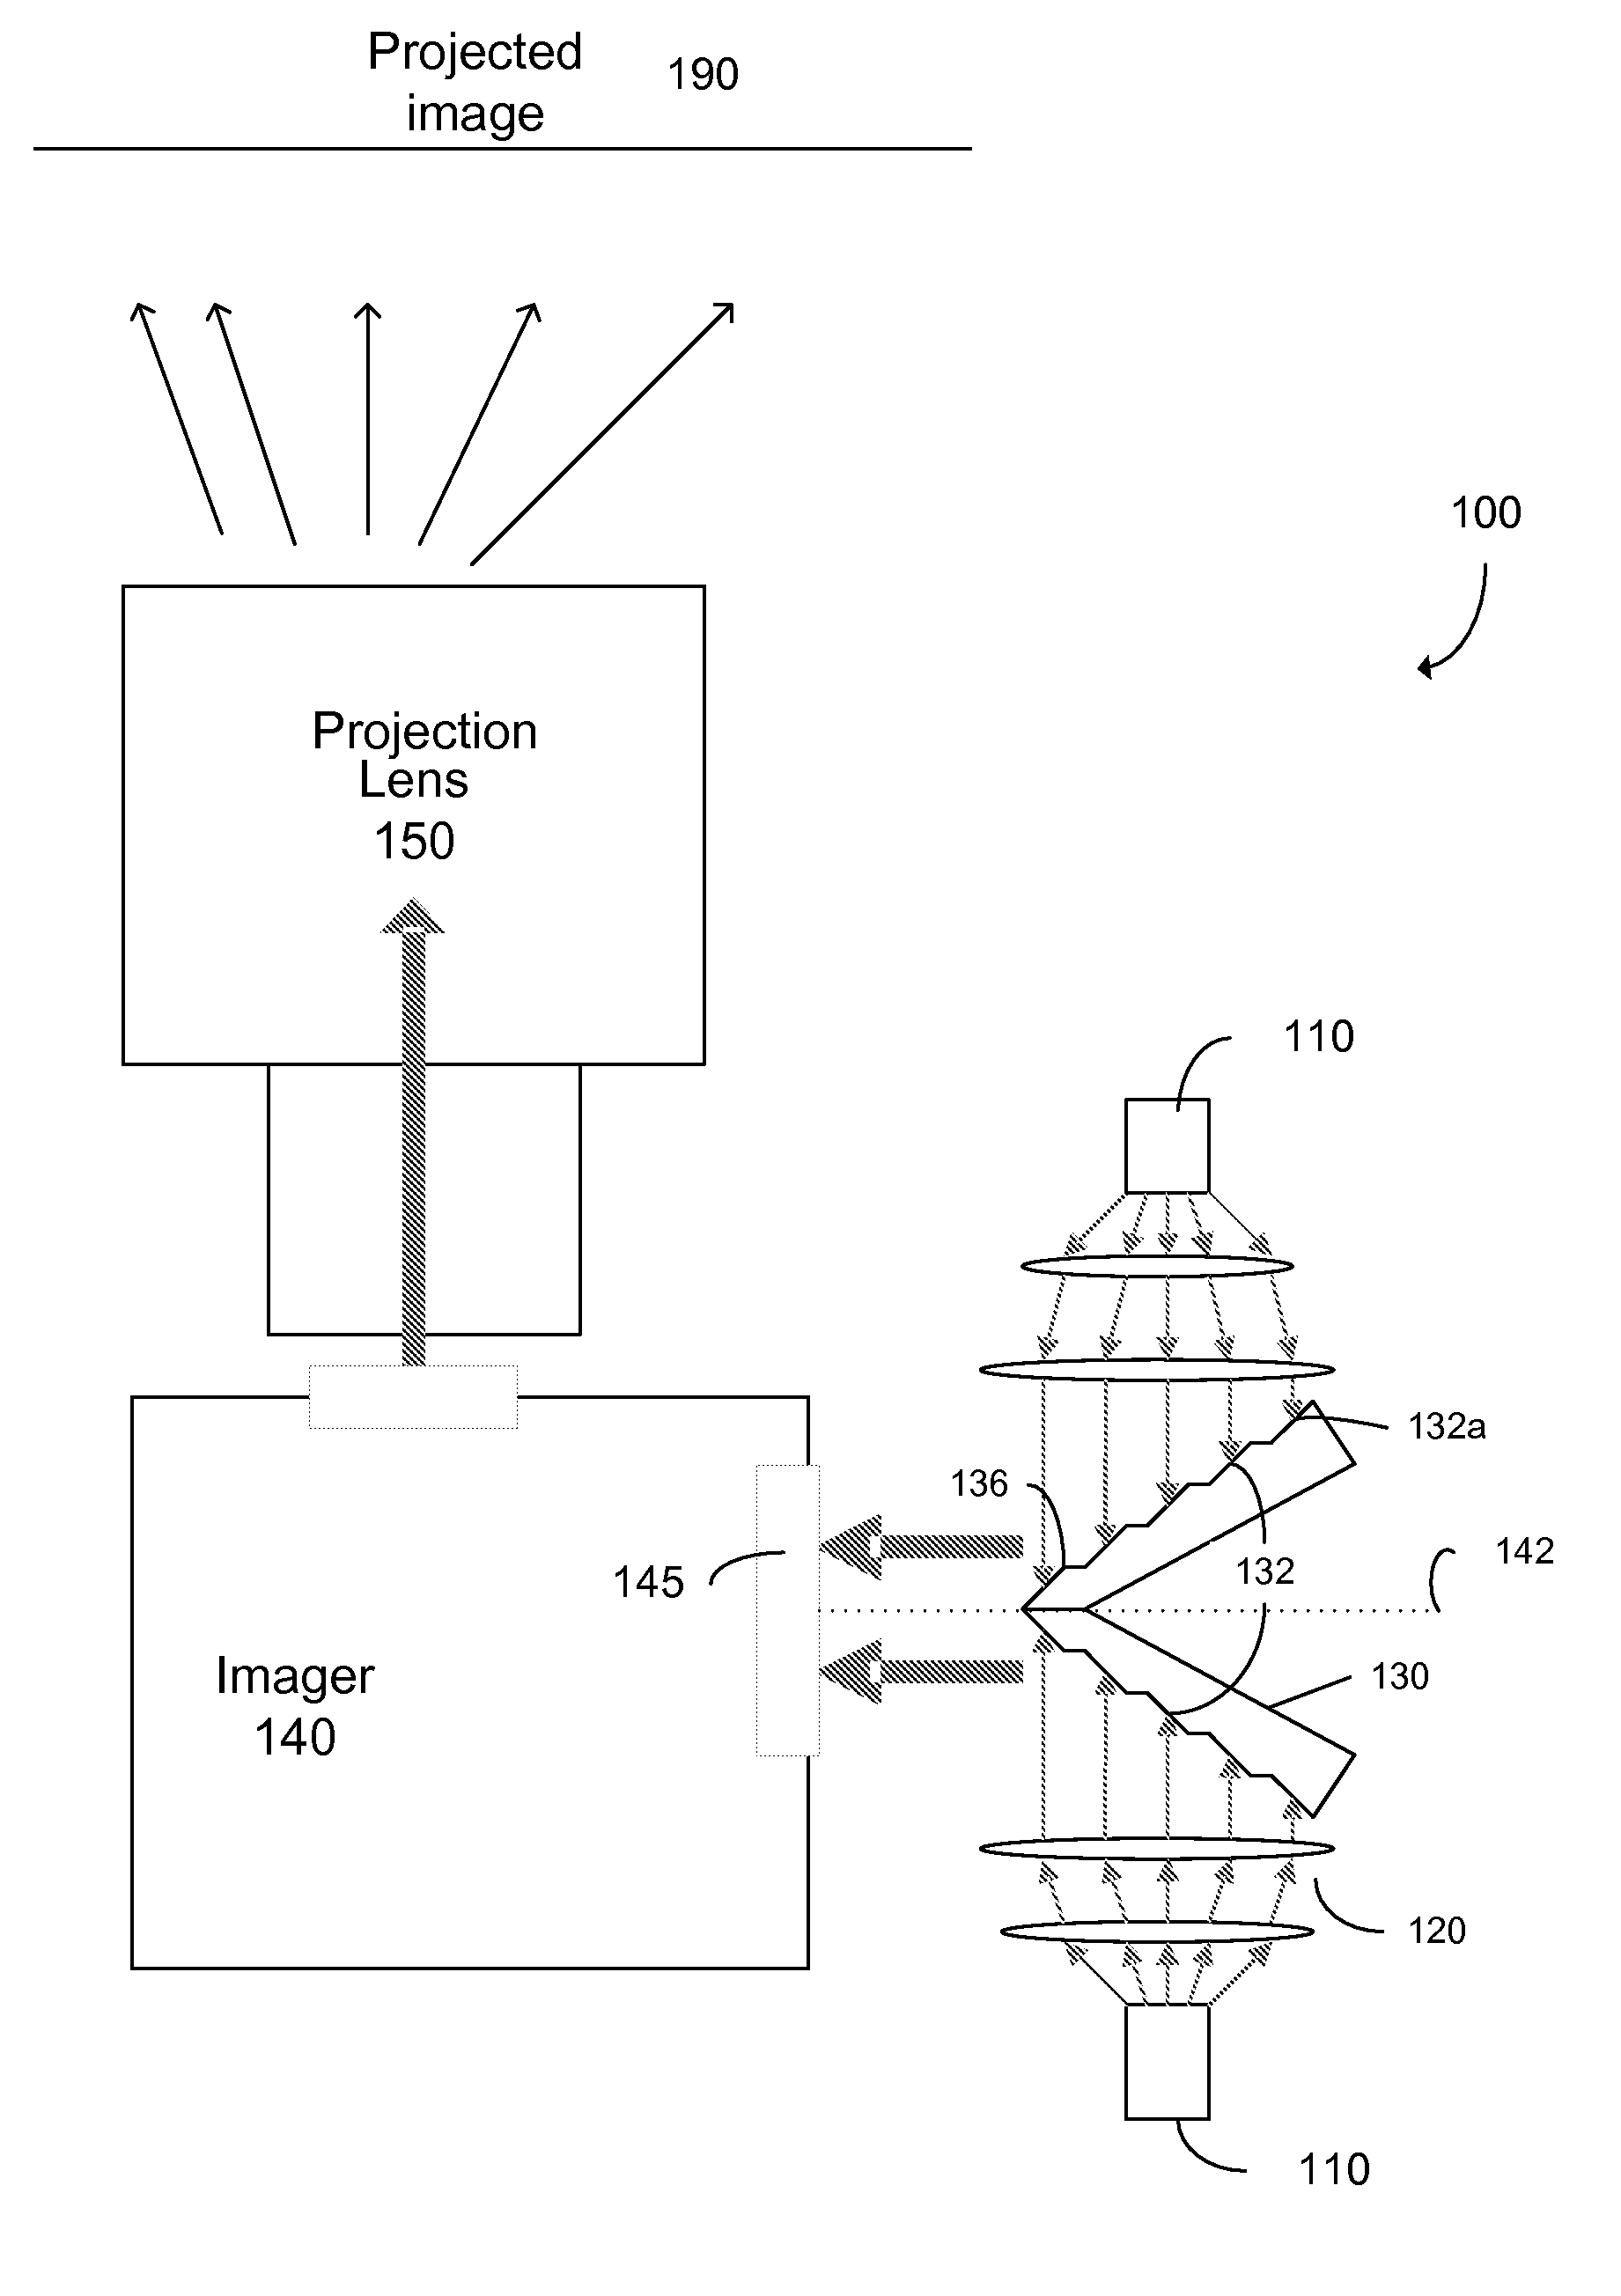 High intensity image projector using sectional mirror